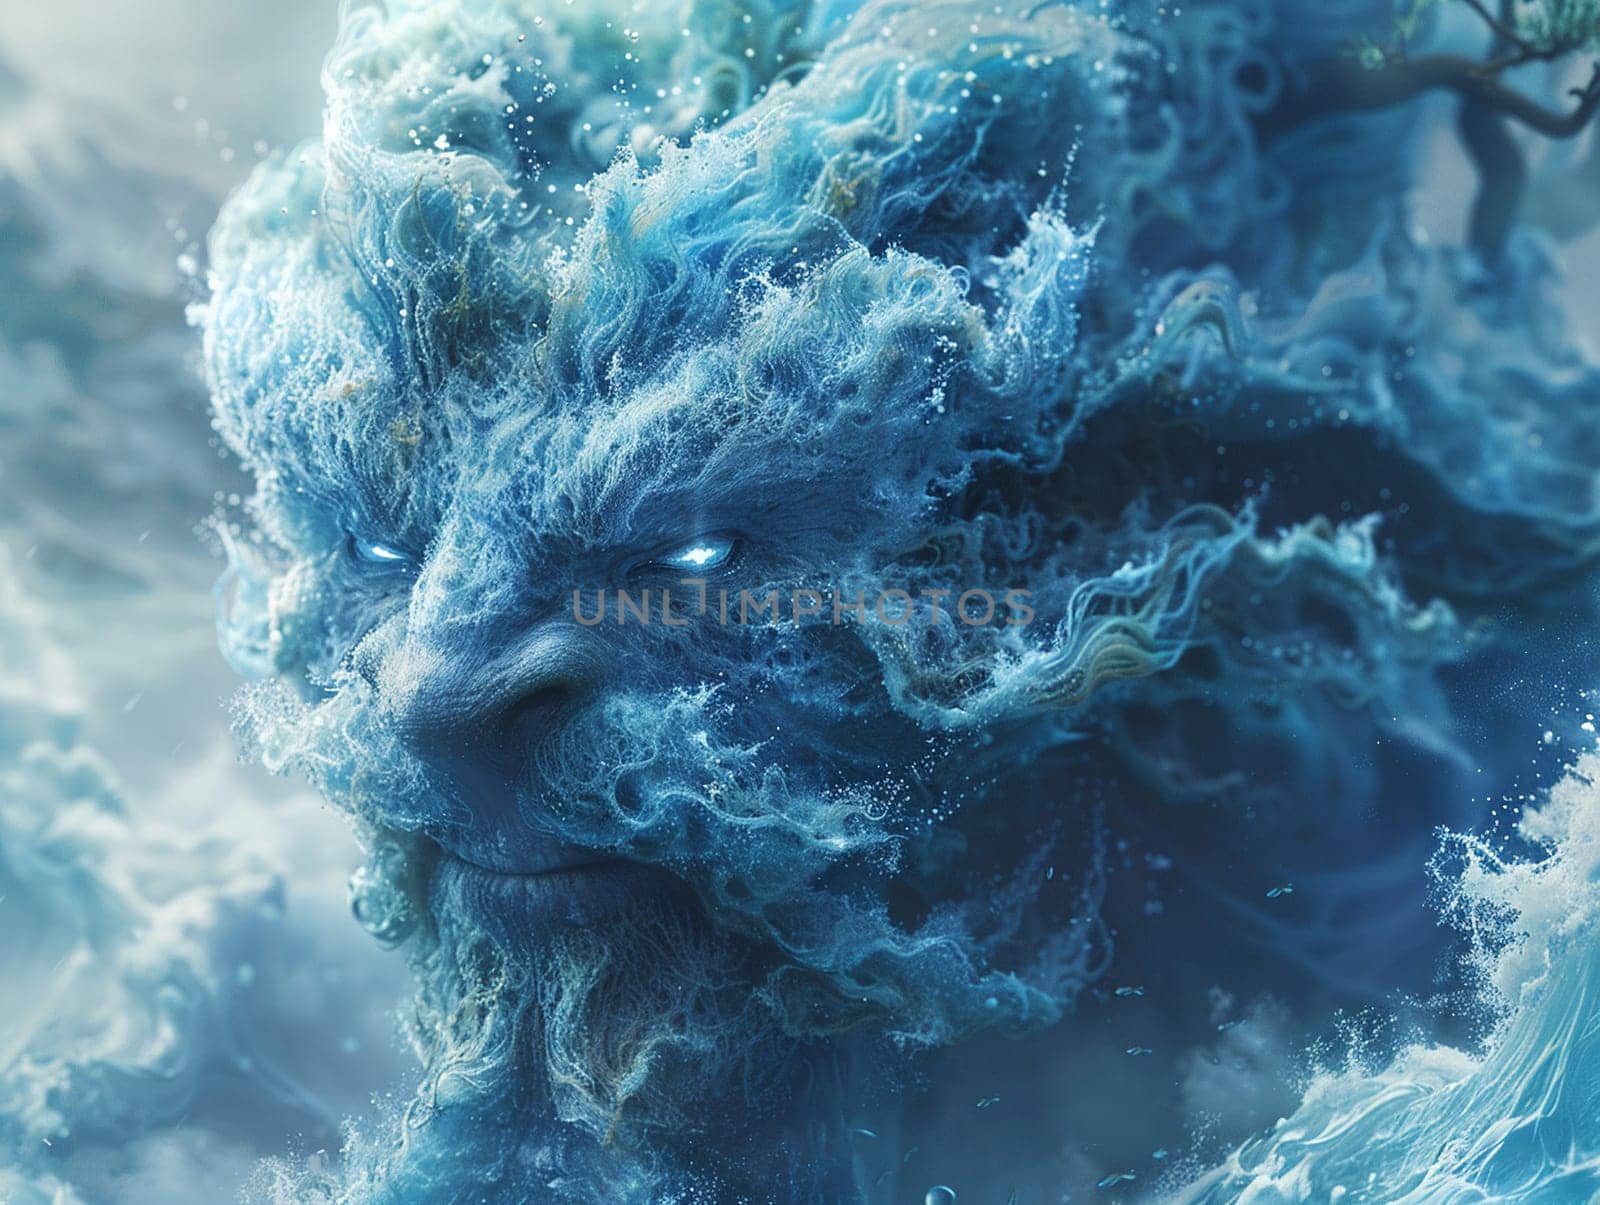 Water elemental creature, emerging from the sea in a stunning 3D illustrated style.